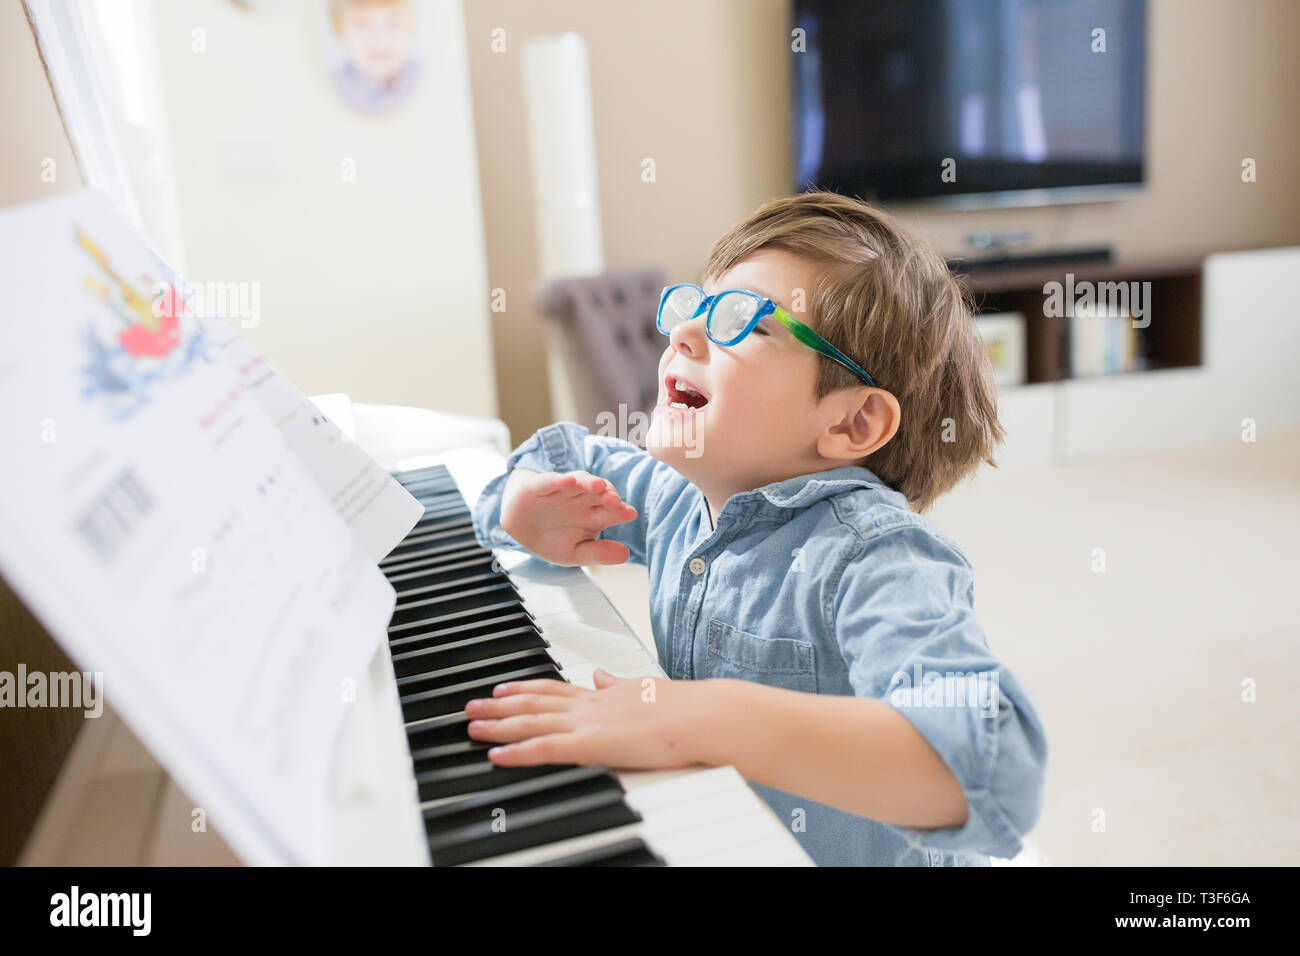 Boy with eyeglasses is playing piano Stock Photo